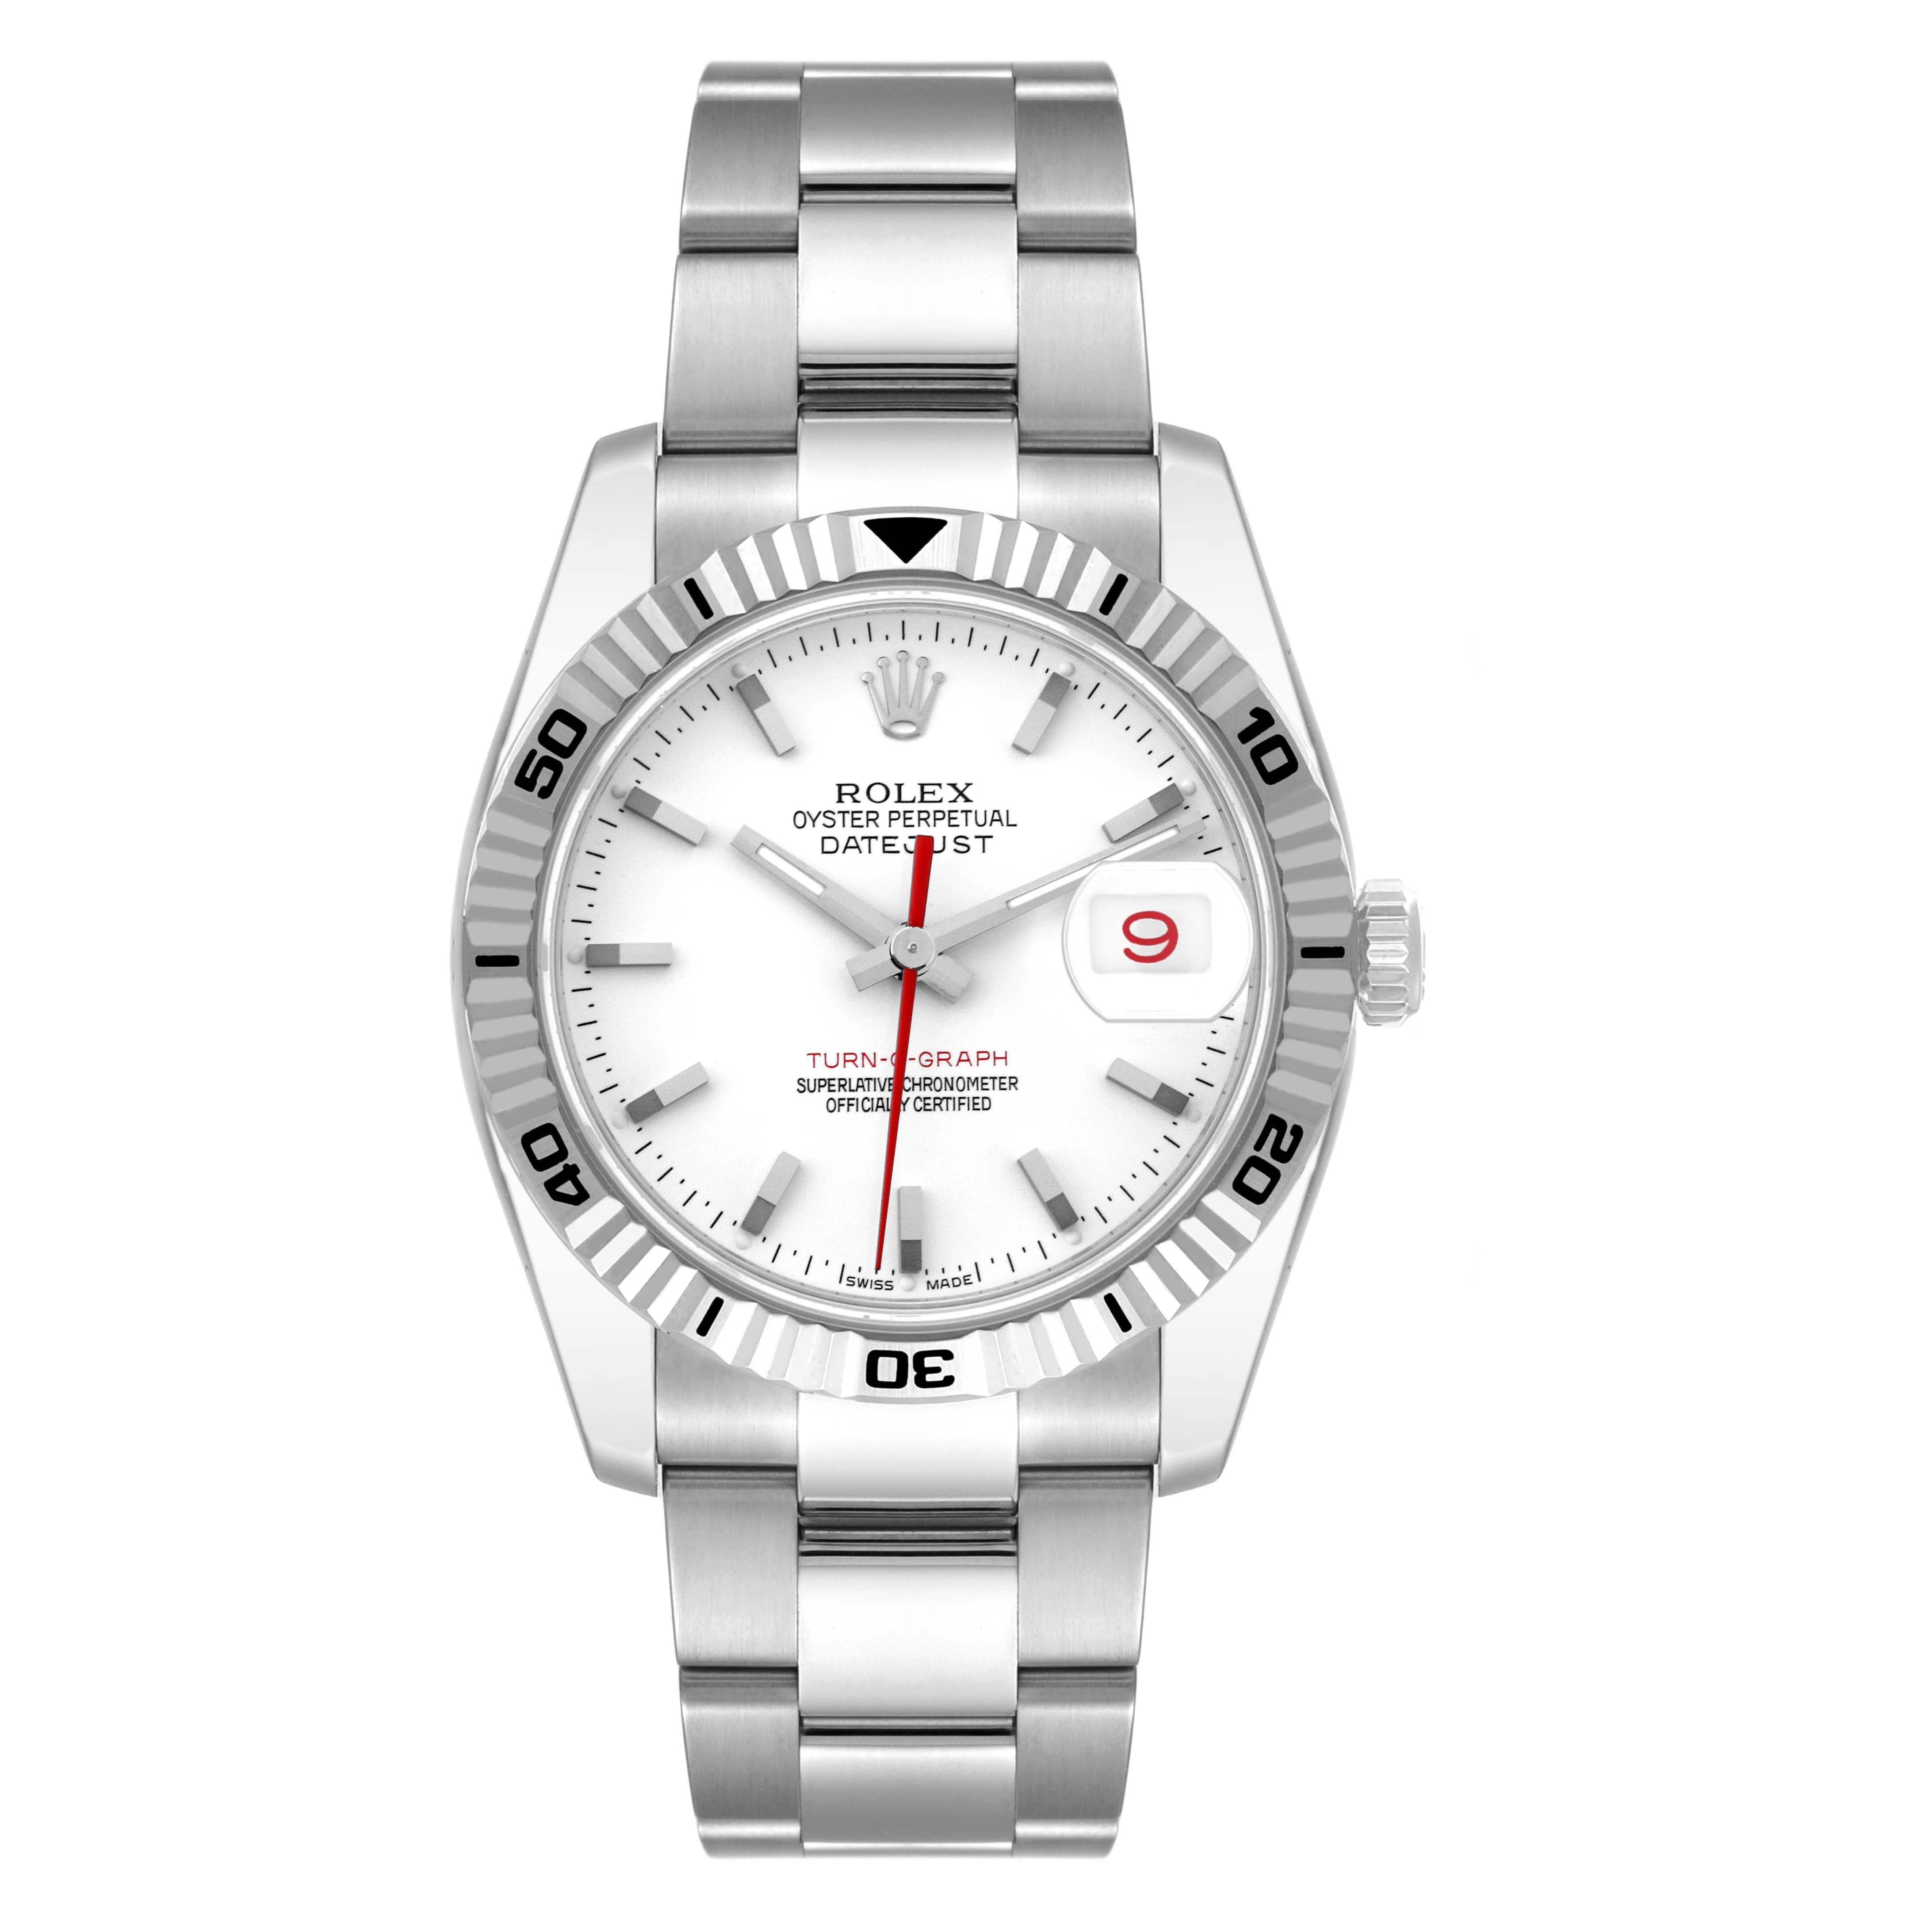 Rolex Datejust Turnograph White Dial Steel Mens Watch 116264 Box Card. Officially certified chronometer self-winding movement. Stainless steel case 36.0 mm in diameter. Rolex logo on the crown. 18k white gold fluted bidirectional rotating turnograph